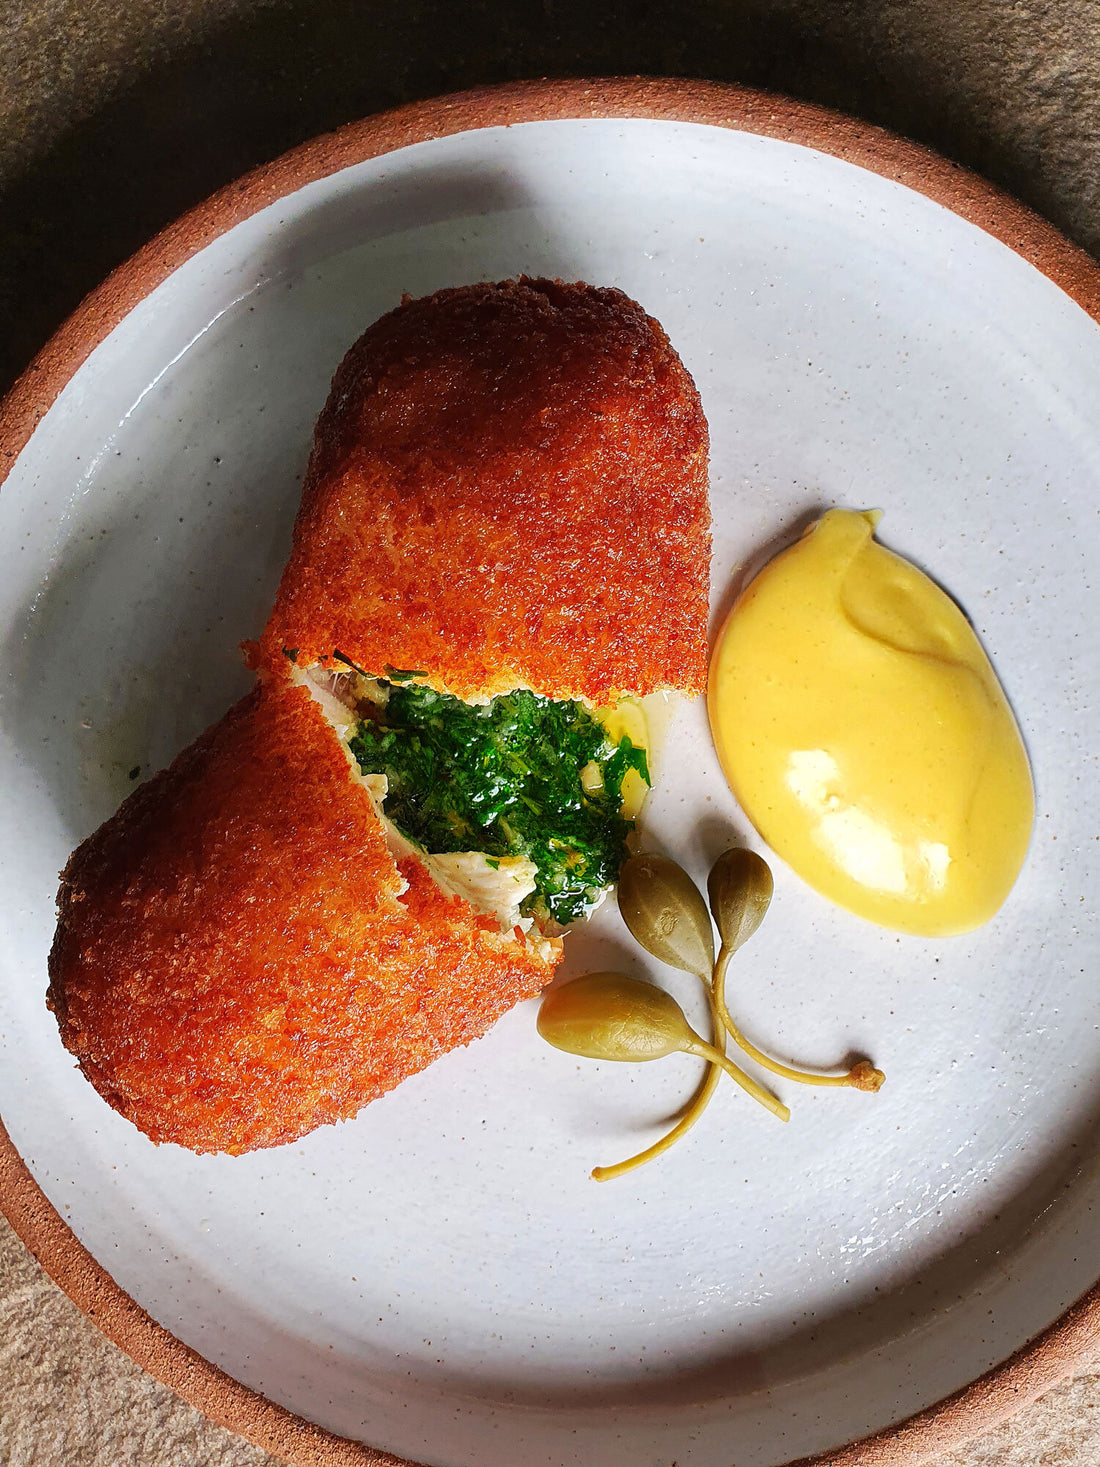 Simmie's Recipes: Tarragon Chicken Kiev with Truffle Mayo and Caper Berries